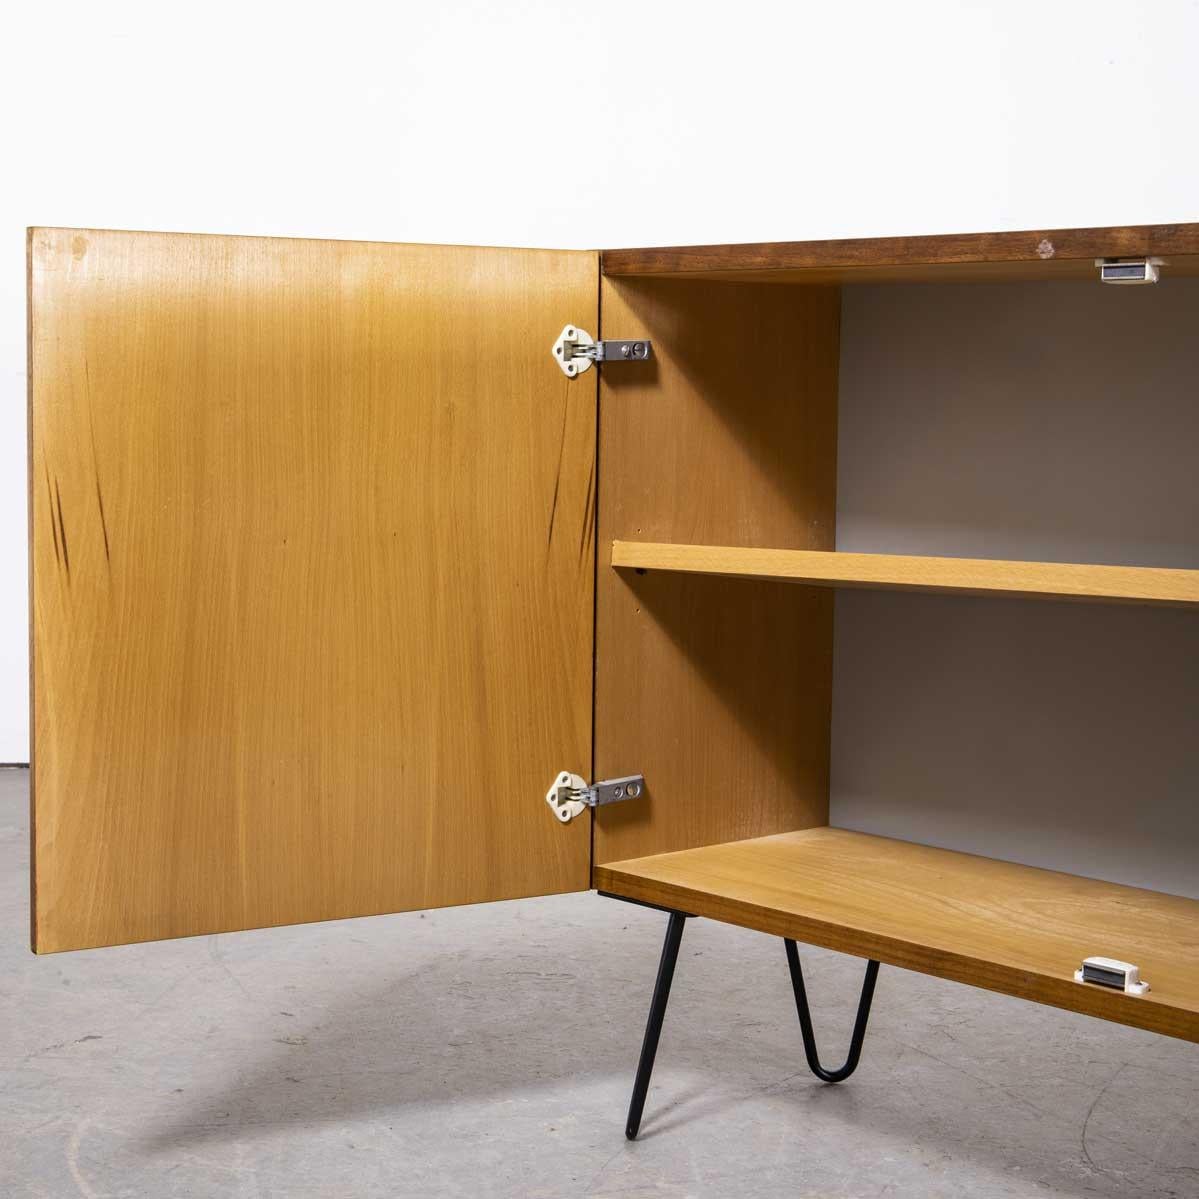 1960’s Small two door cabinet – cupboard
1960’s Small two door cabinet – cupboard. Good sized cabinet/cupboard produced by Up Navody in the Czech Republic. Made principally of matched and figured sapele with a contrasting beech interior. The two